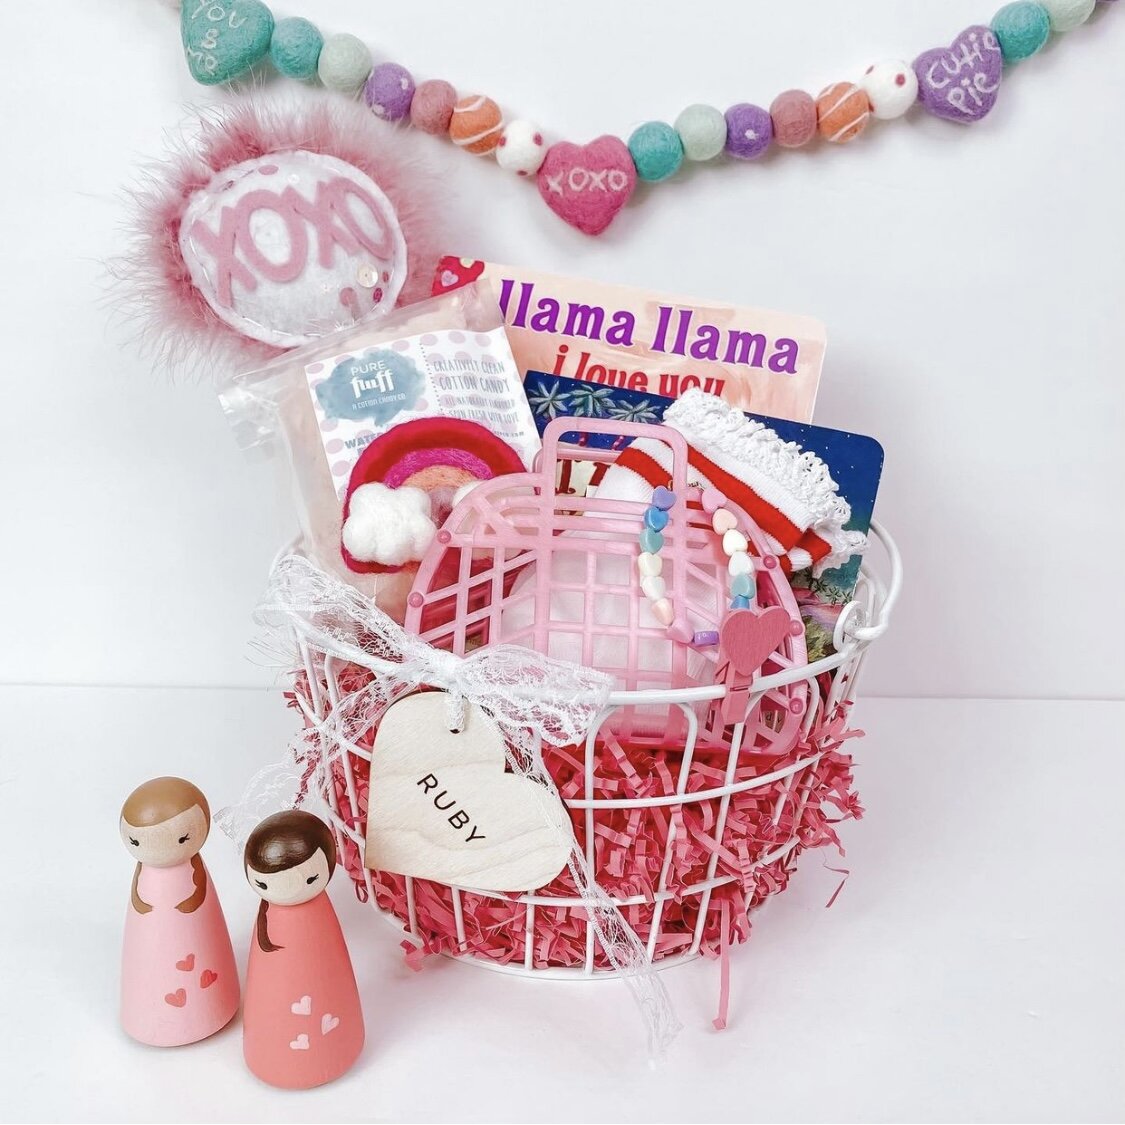 Jelly Bags Make Unique Gift Baskets - From $3 Each!